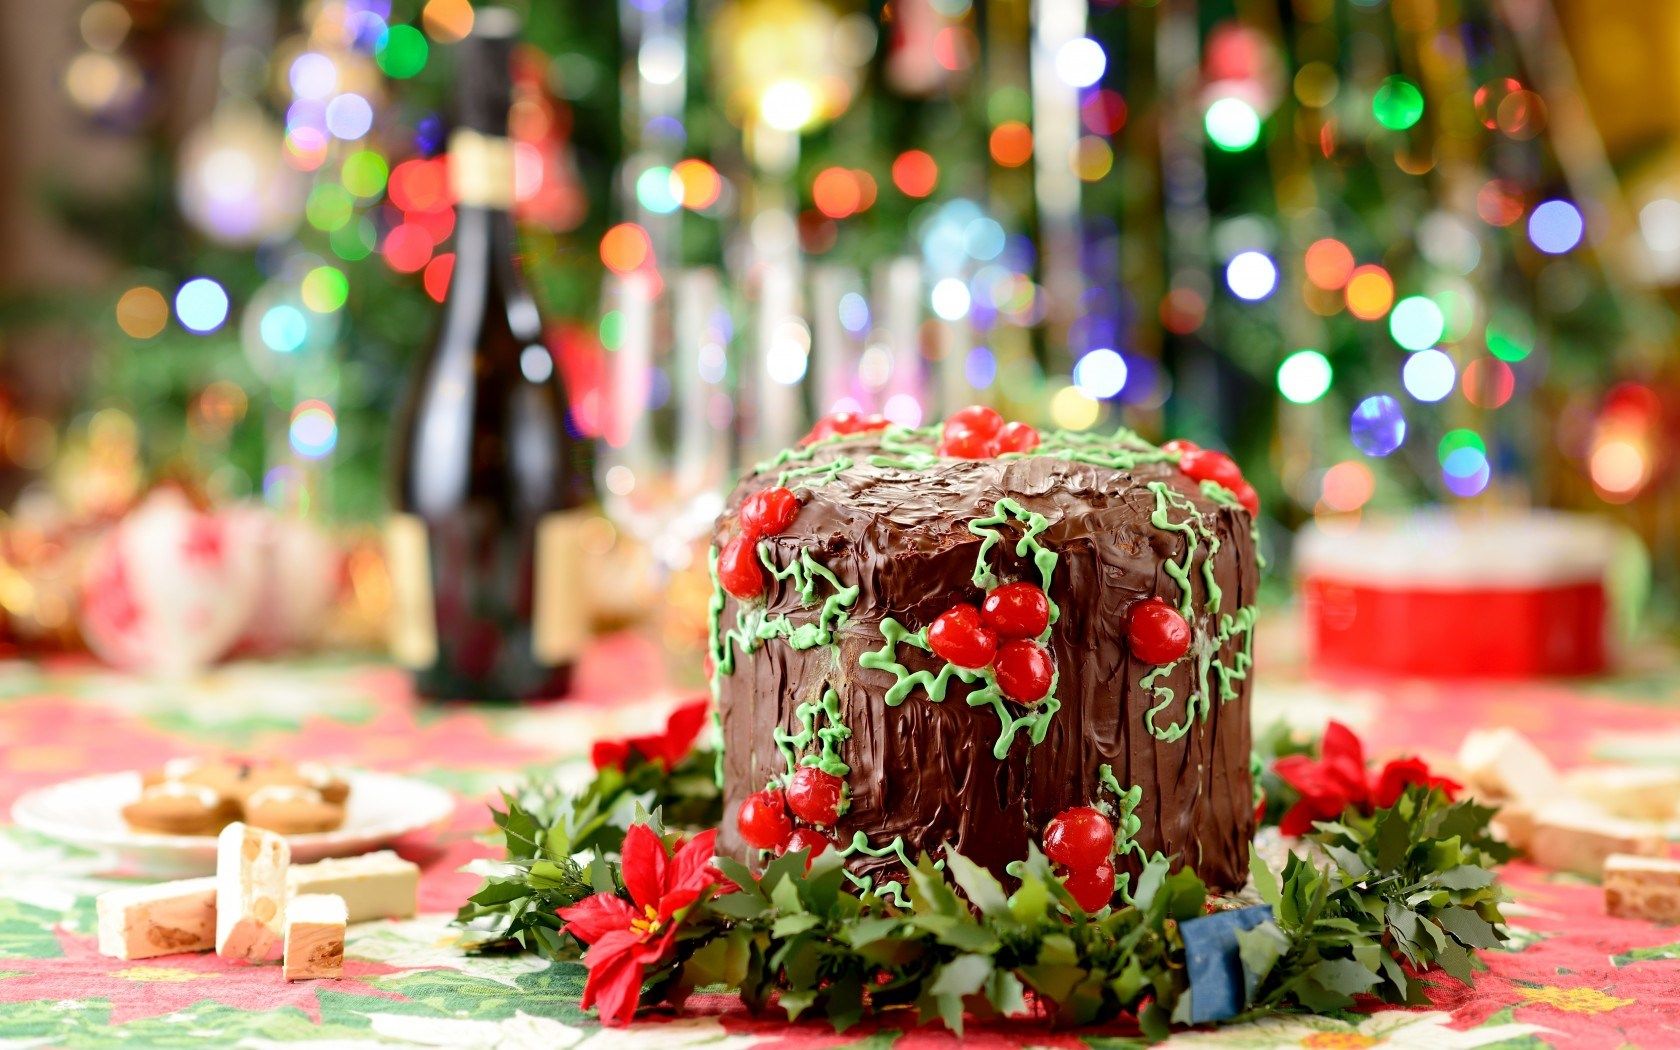 Free download Cake Chocolate Food Holiday Winter Christmas New Year [1680x1050] for your Desktop, Mobile & Tablet. Explore Christmas Food Wallpaper. Christmas Food Wallpaper, Cute Food Wallpaper, Junk Food Wallpaper